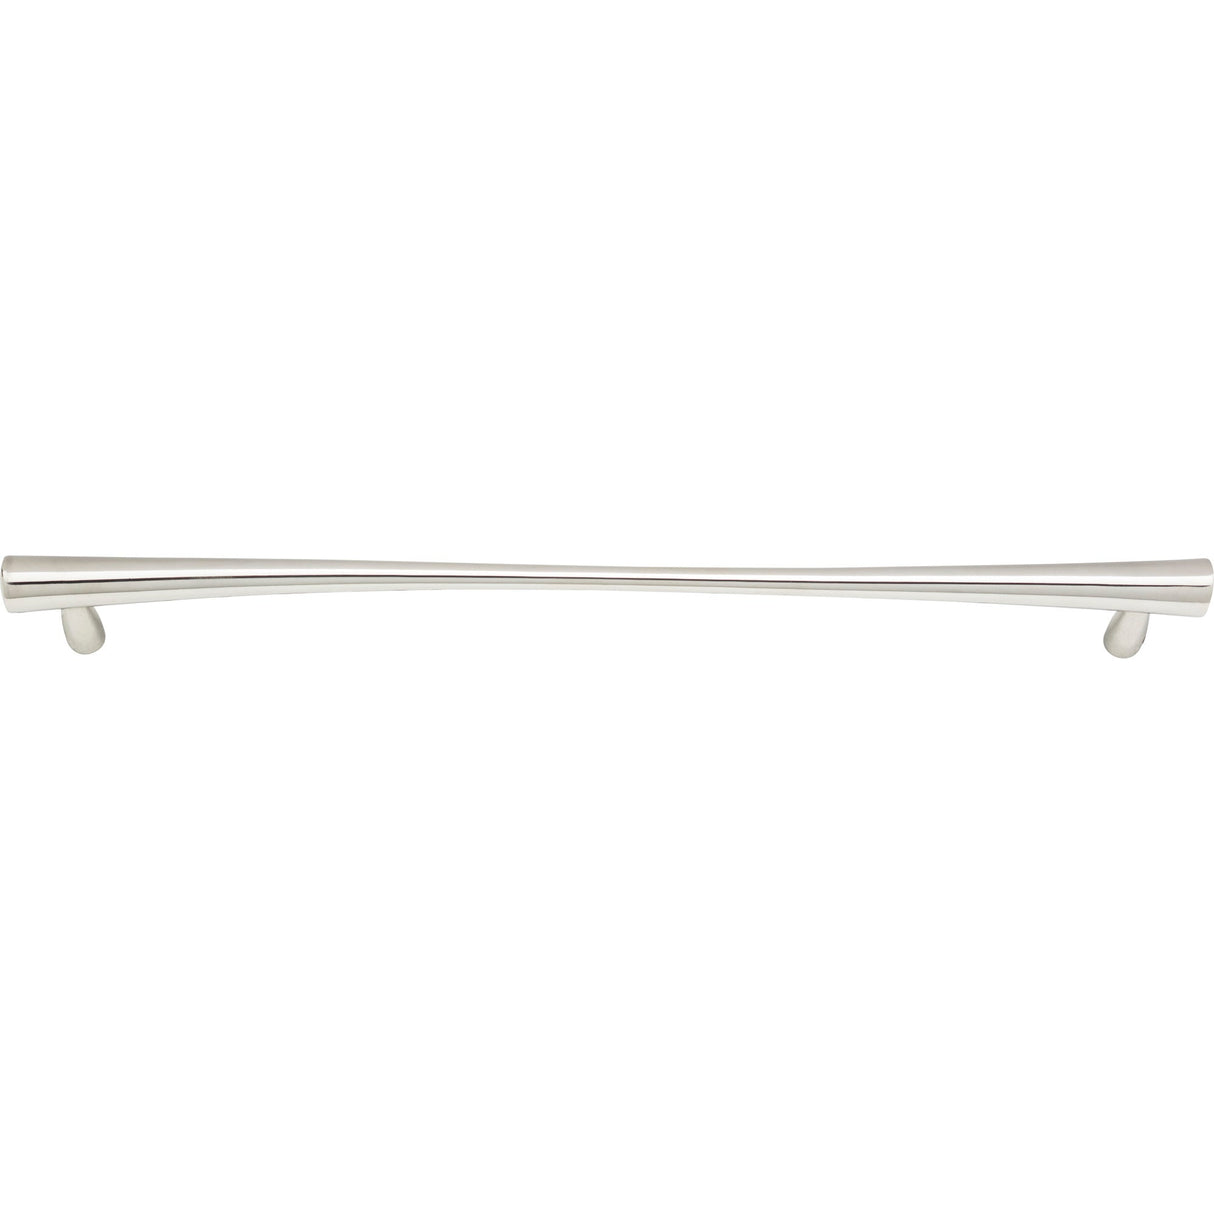 Atlas Homewares Fluted Pull 11 5/16 Inch (c-c) Polished Stainless Steel